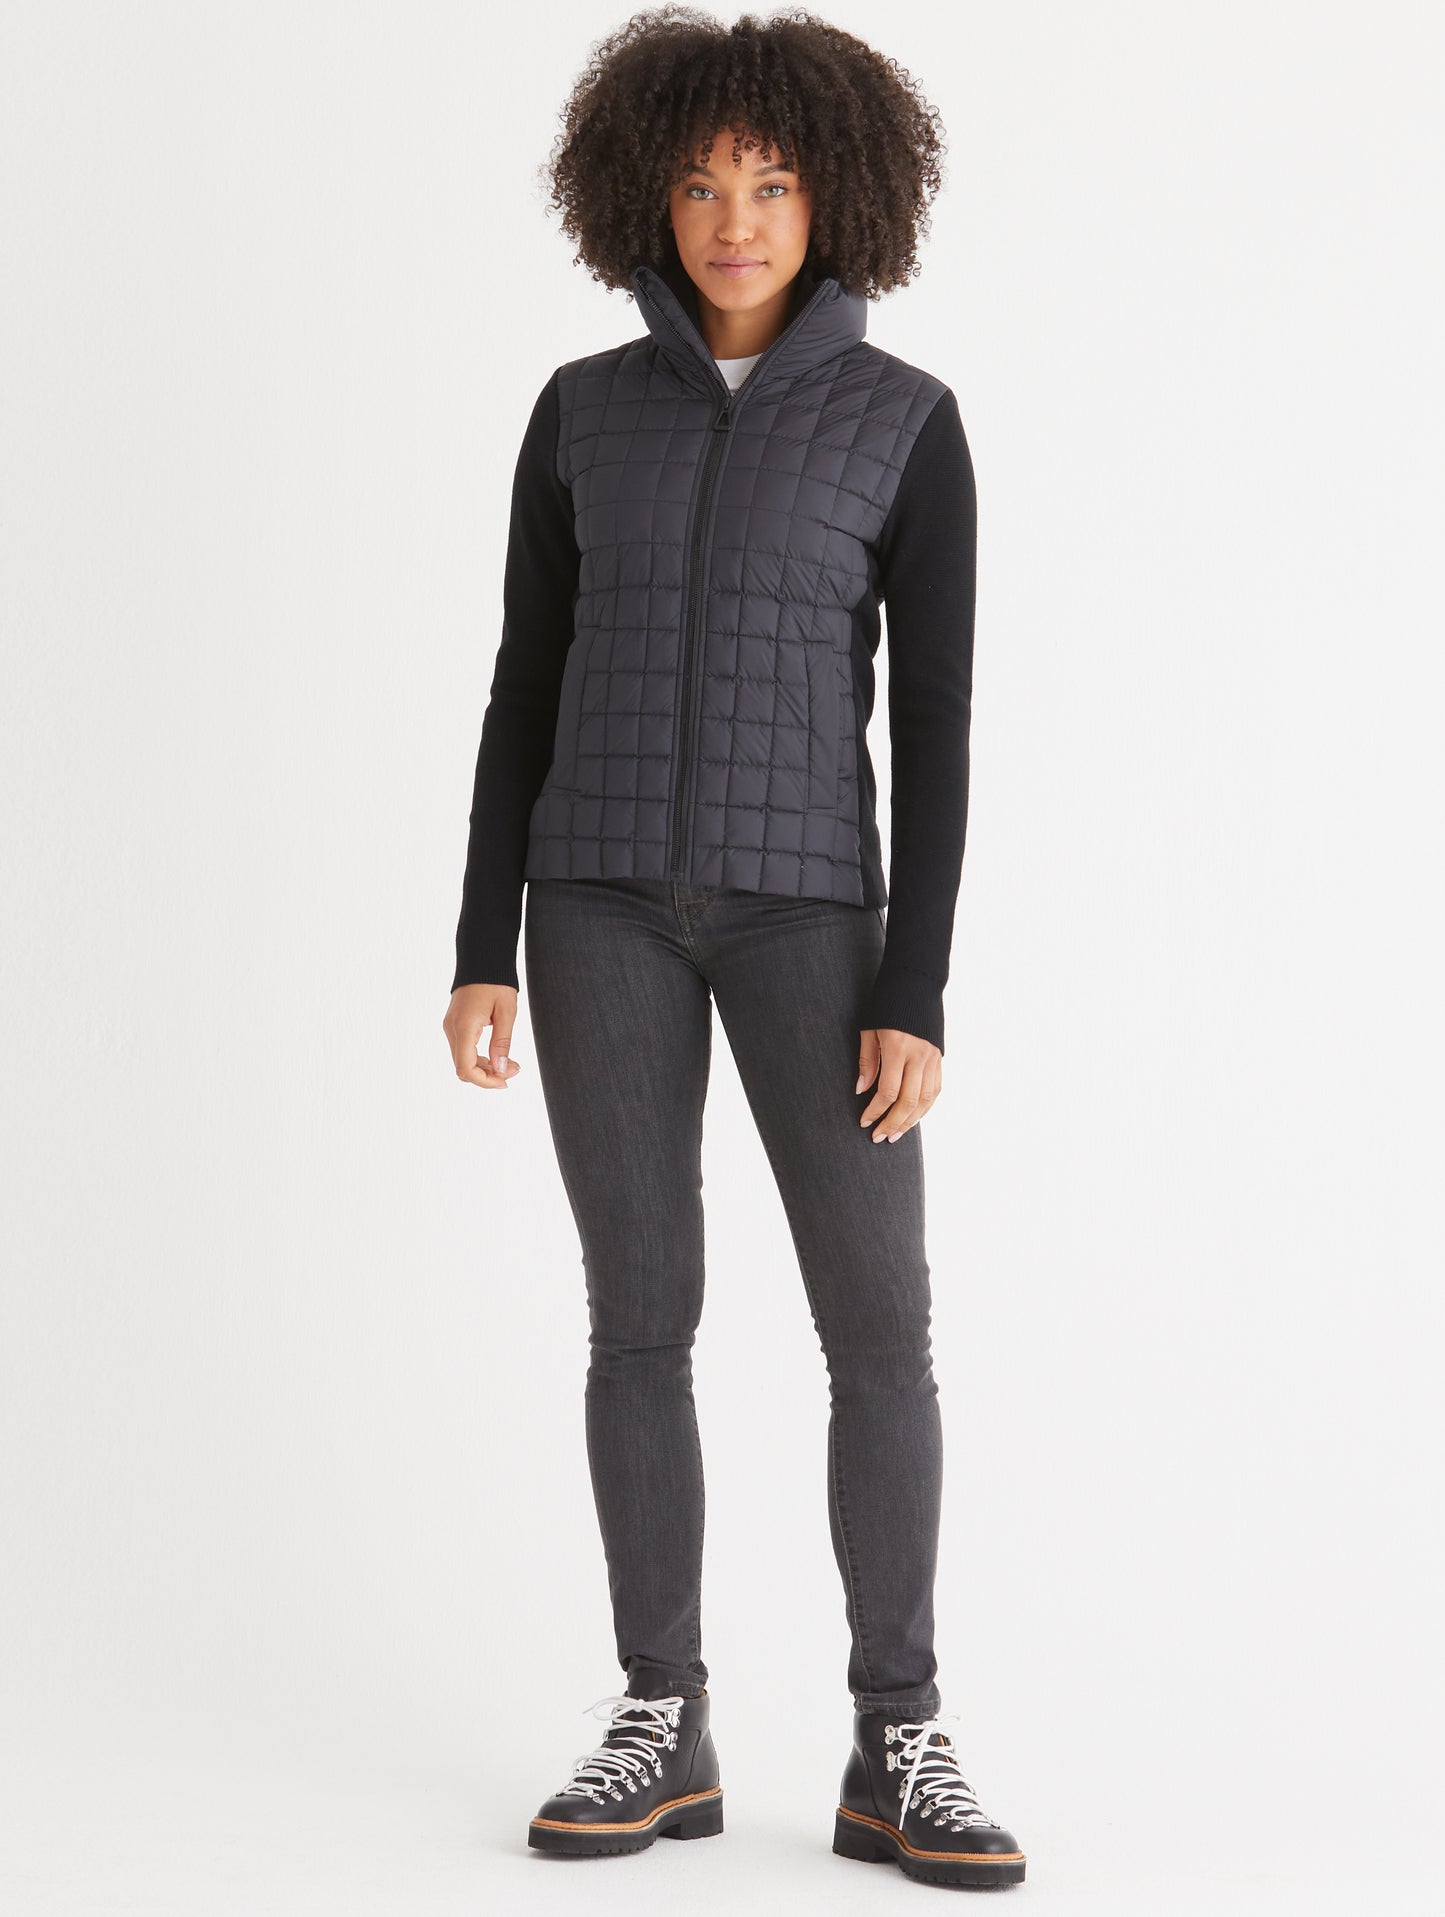 woman wearing quilted black full-zip sweater